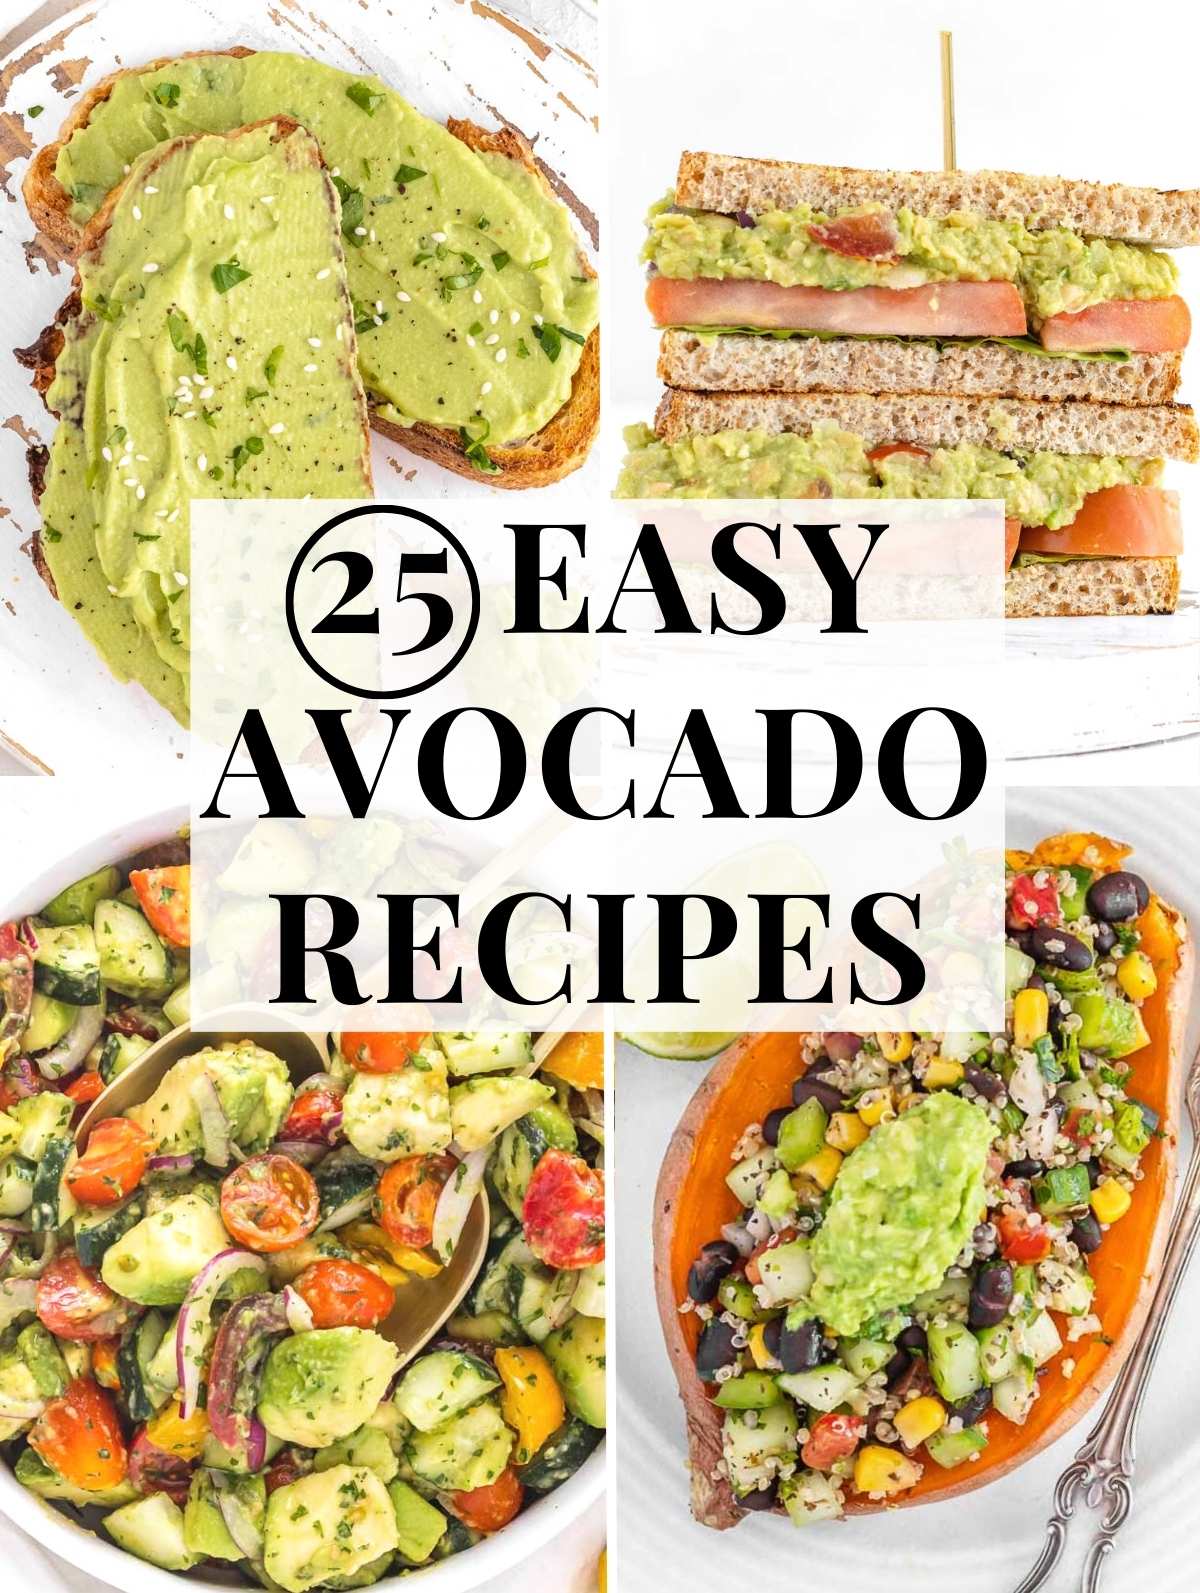 Easy avocado recipes for breakfast, lunch and dinner